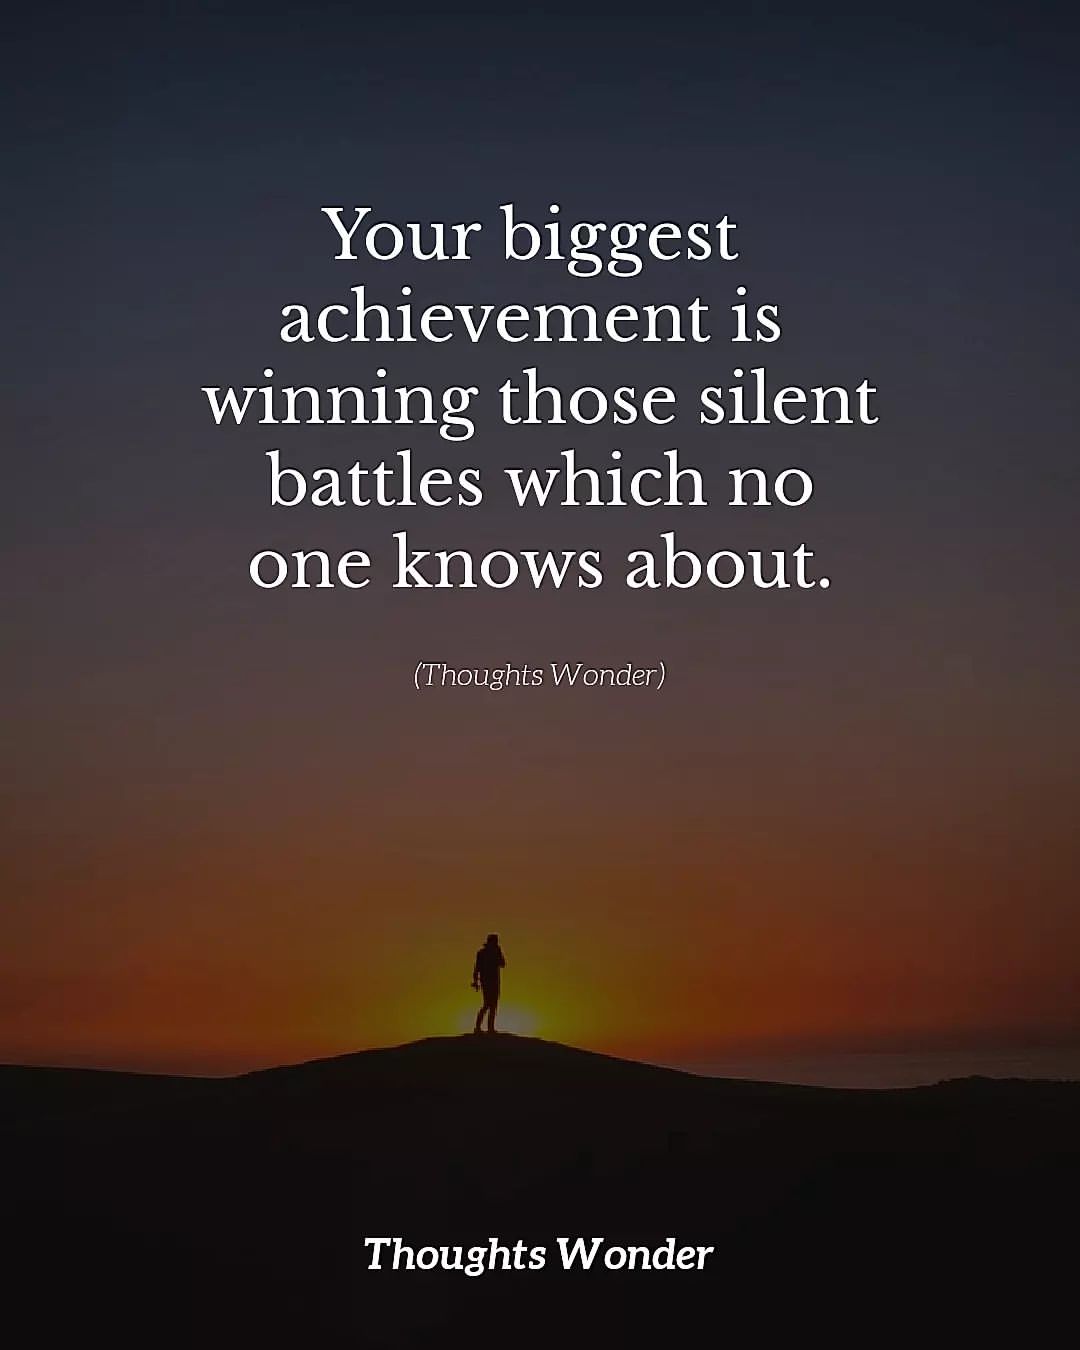 Your biggest achievement is winning those silent battles which no one knows about.